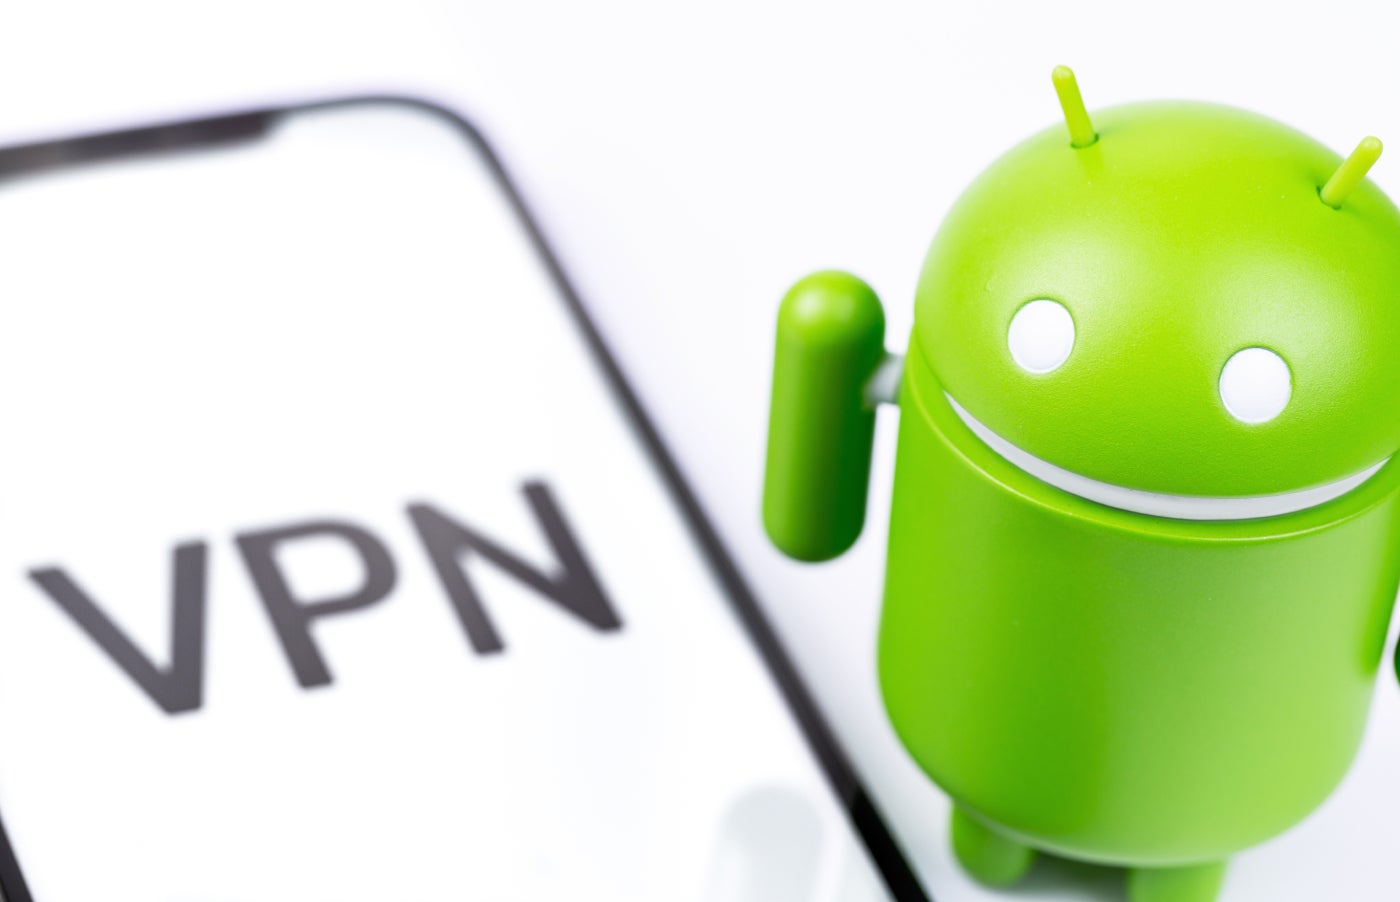 How to Set up & Use a VPN on Android